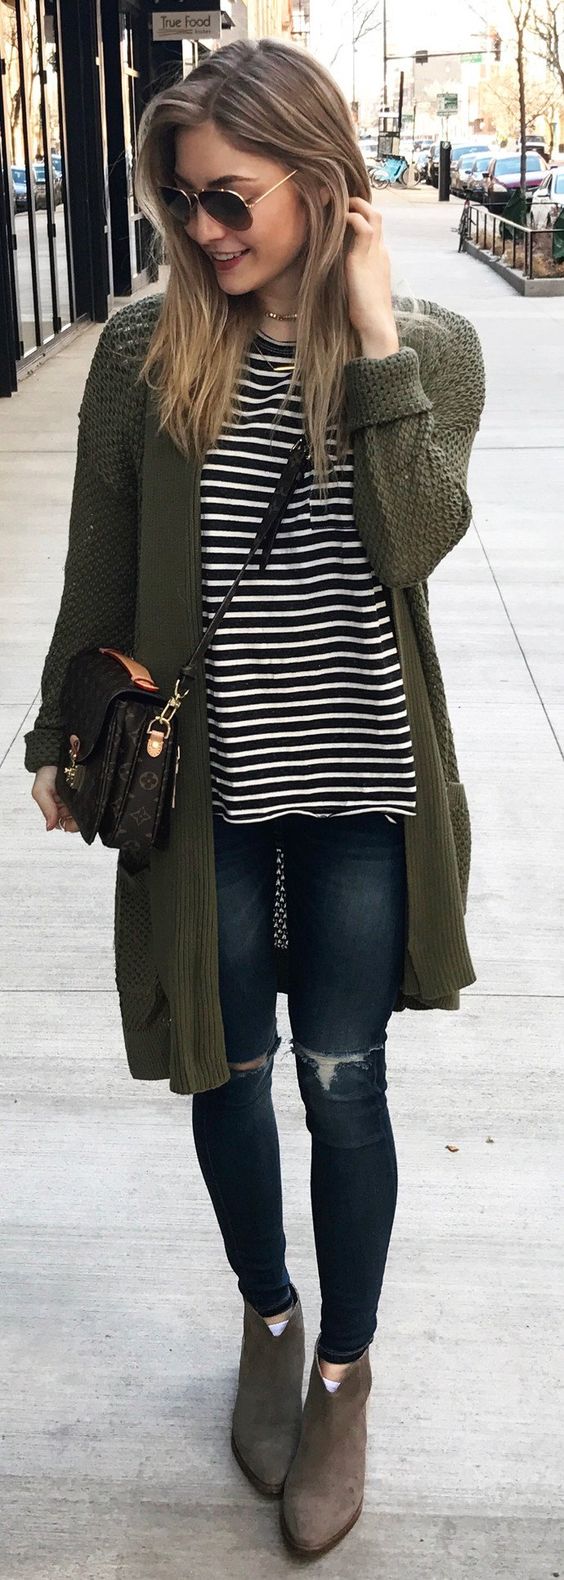 stripped top + bag + cardigan + rips + boots